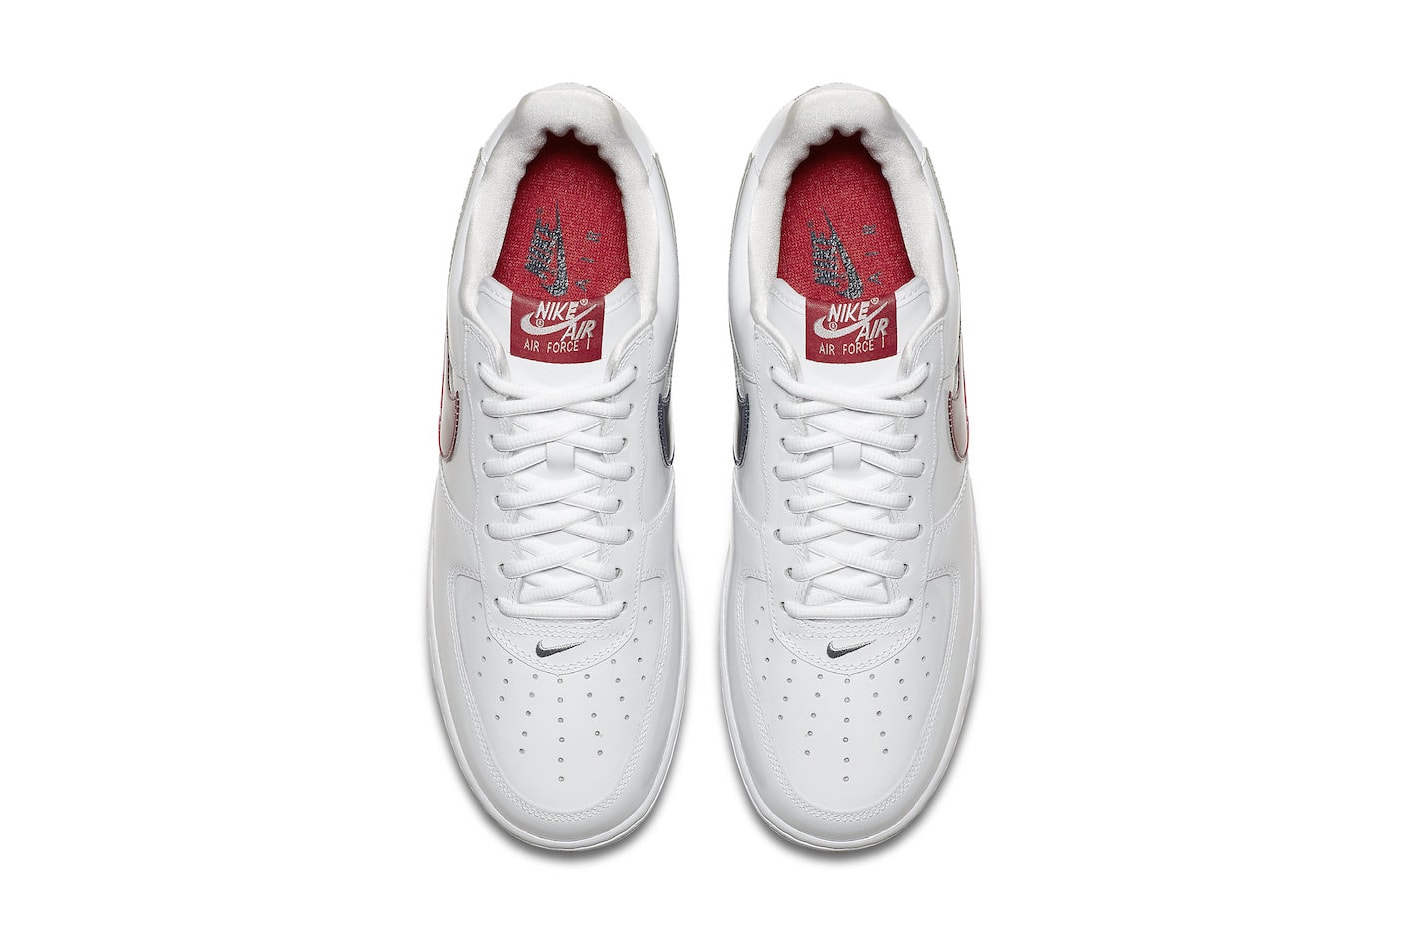 Nike Air Force 1 Low Taiwan 2018 Retro official images white blue red icy release date info drop sneakers shoes footwear